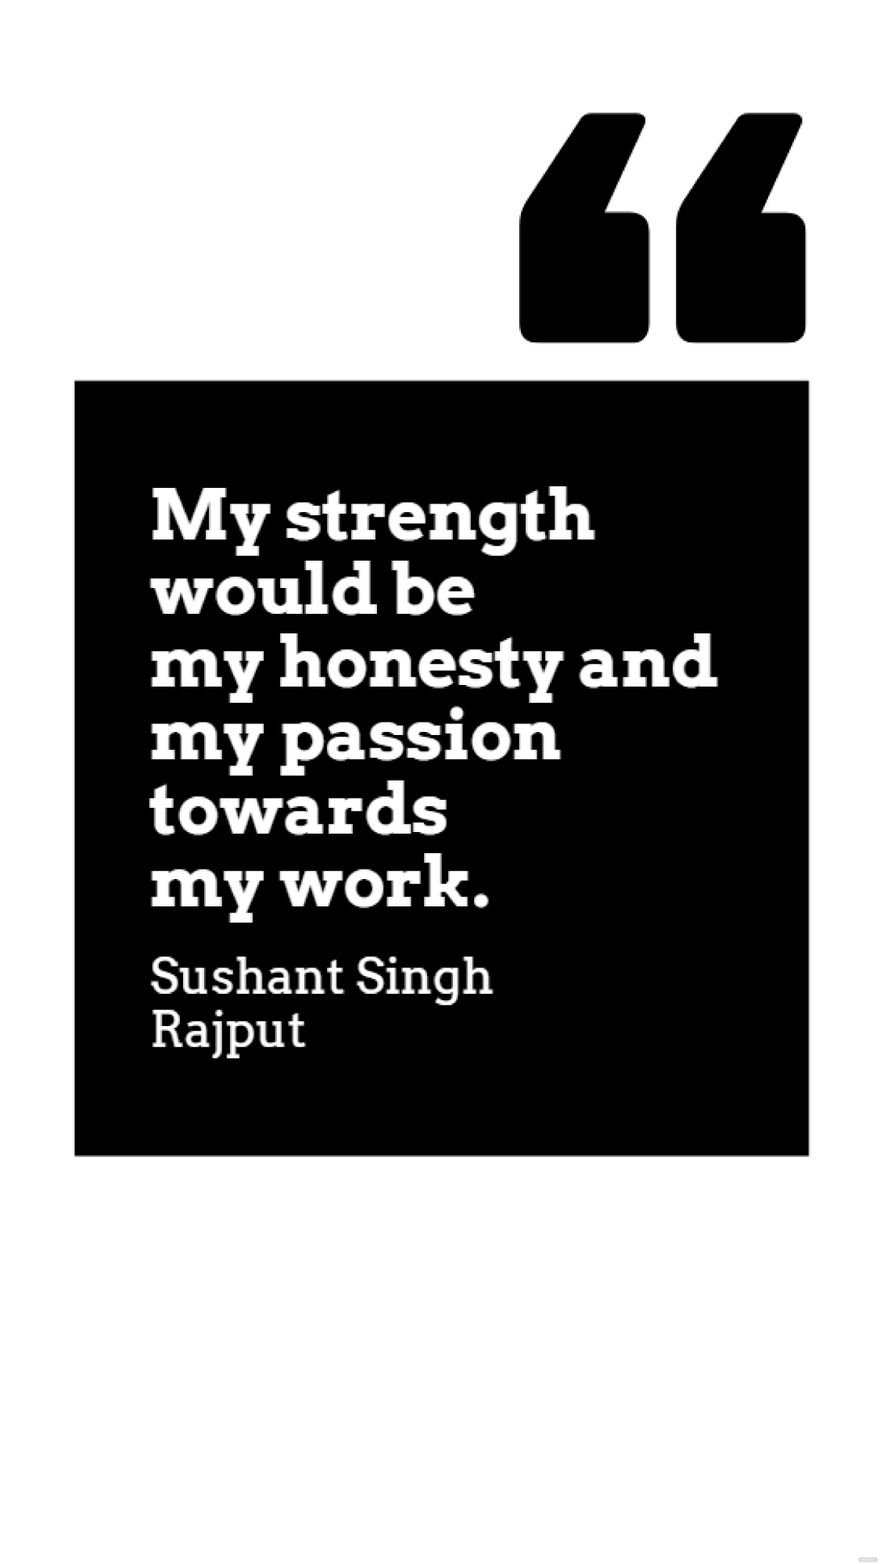 Sushant Singh Rajput - My strength would be my honesty and my passion towards my work.